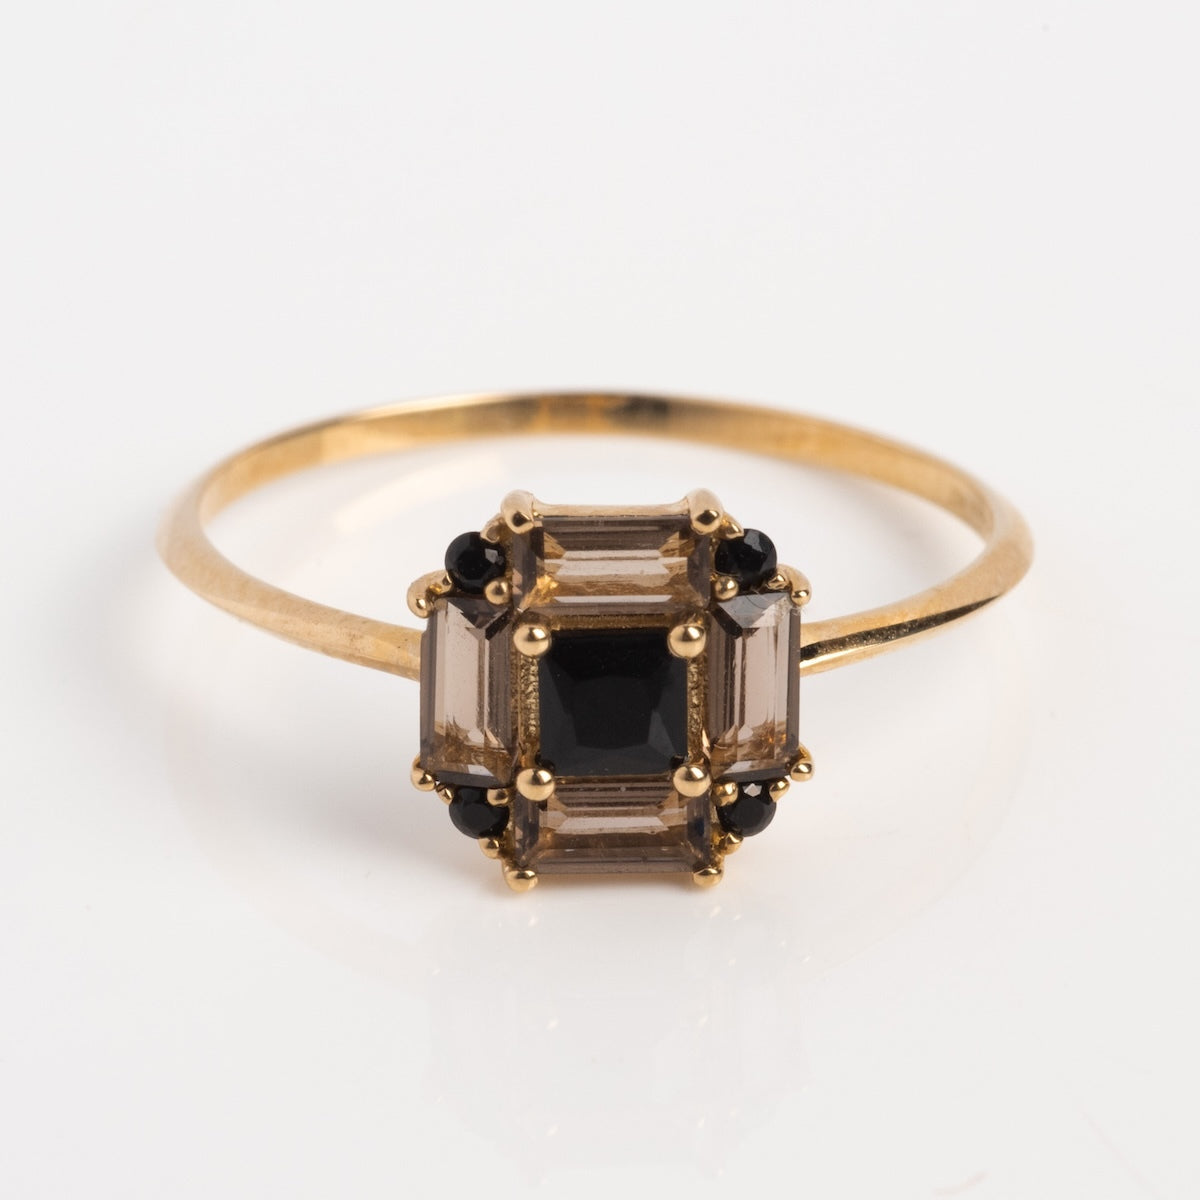 14k Vintage Inspired Art Deco Engagement Ring | Local Eclectic